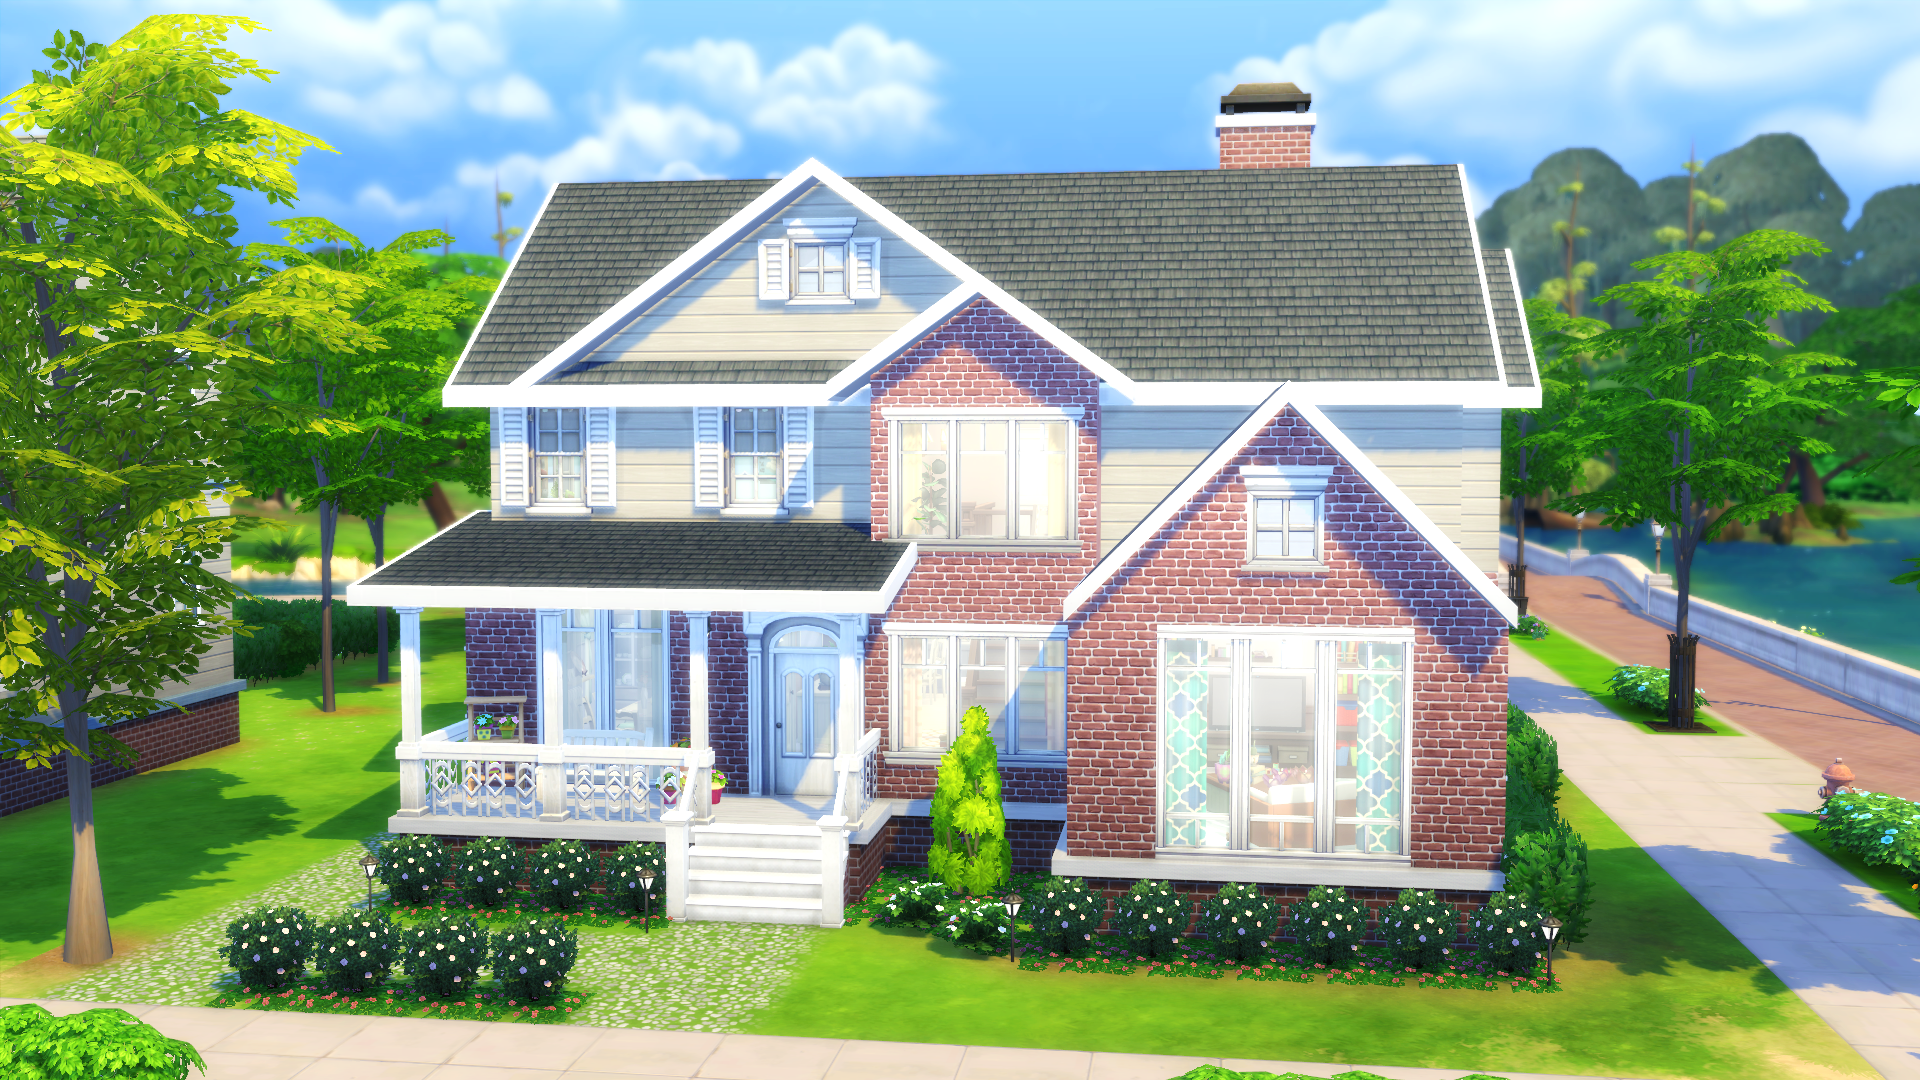 Sims 4 Houses - Architectural Designs